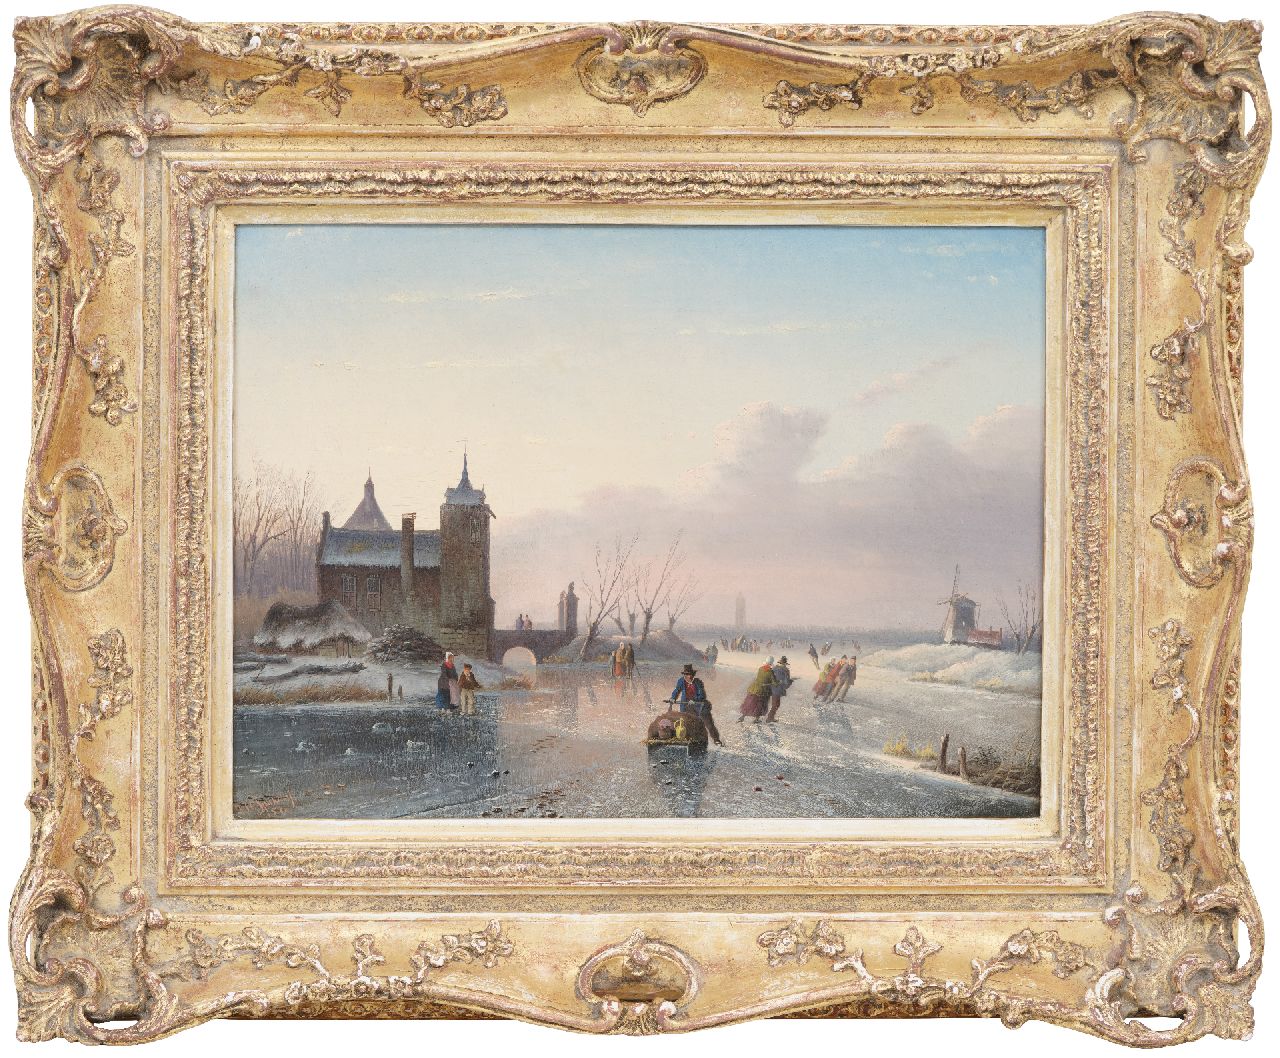 Spohler J.J.C.  | Jacob Jan Coenraad Spohler, Skaters on a frozen waterway, oil on canvas 25.6 x 34.7 cm, signed l.l. and dated '57